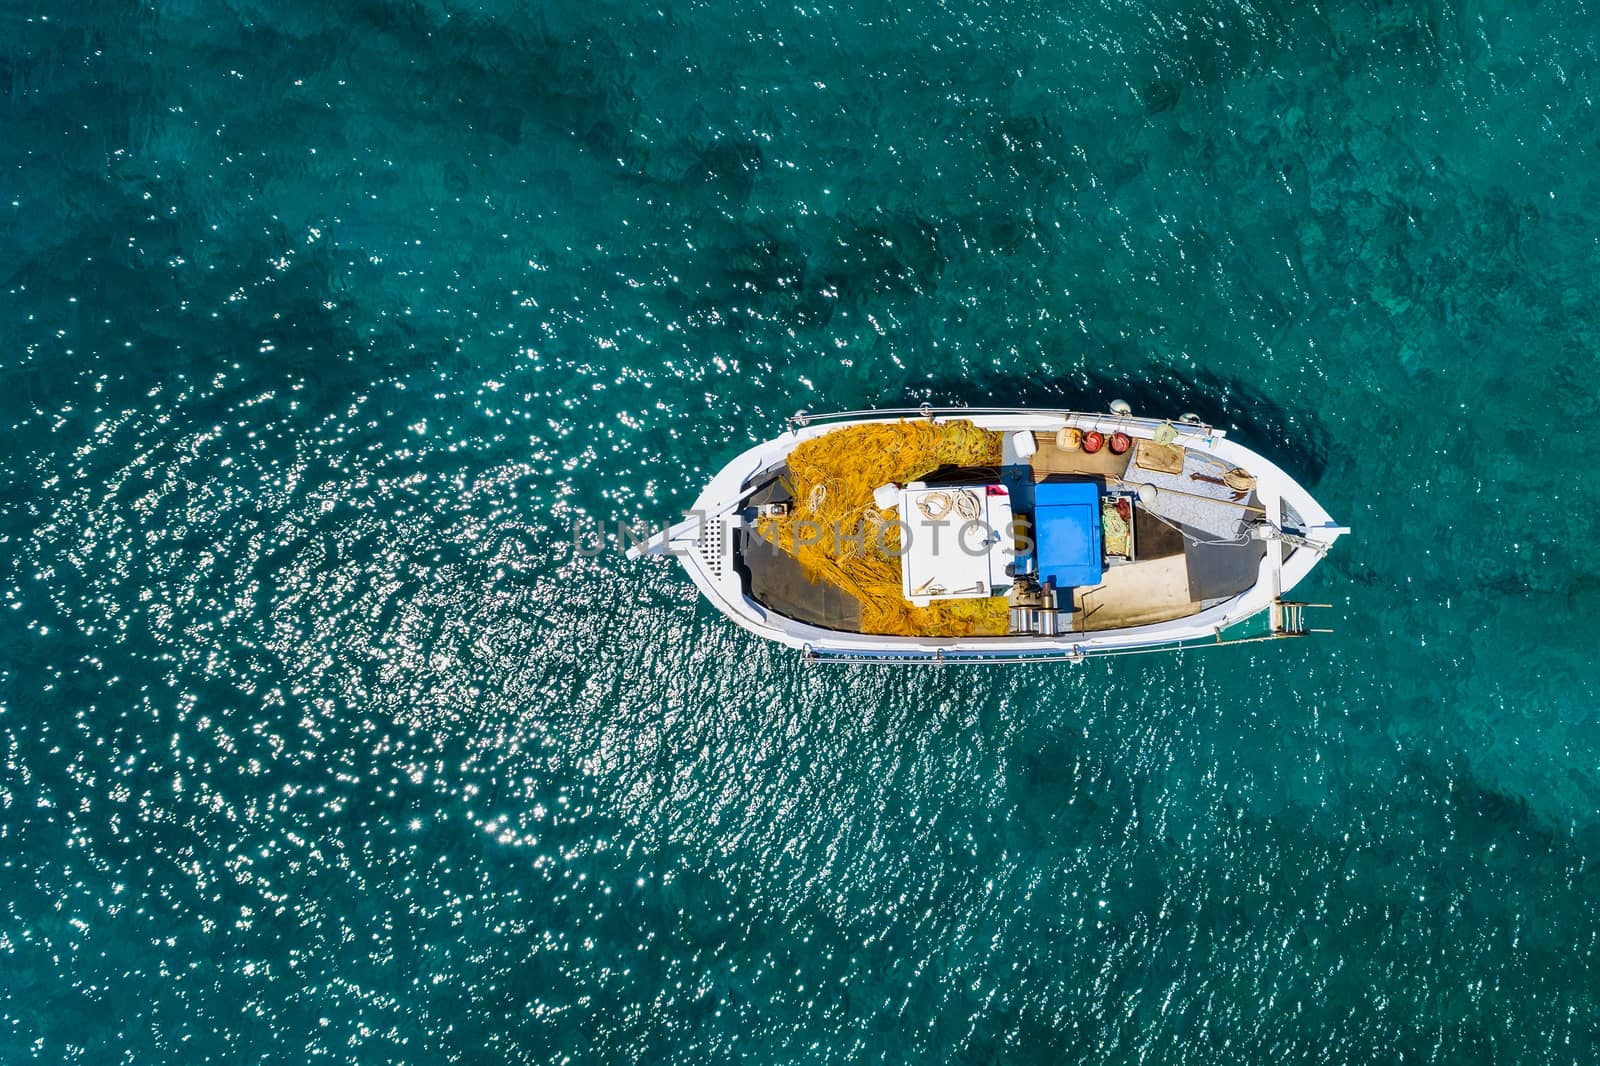 Aerial photo top view of small traditional fishing boat in tropical emerald and turquoise clear sea. Peloponnese, Greece